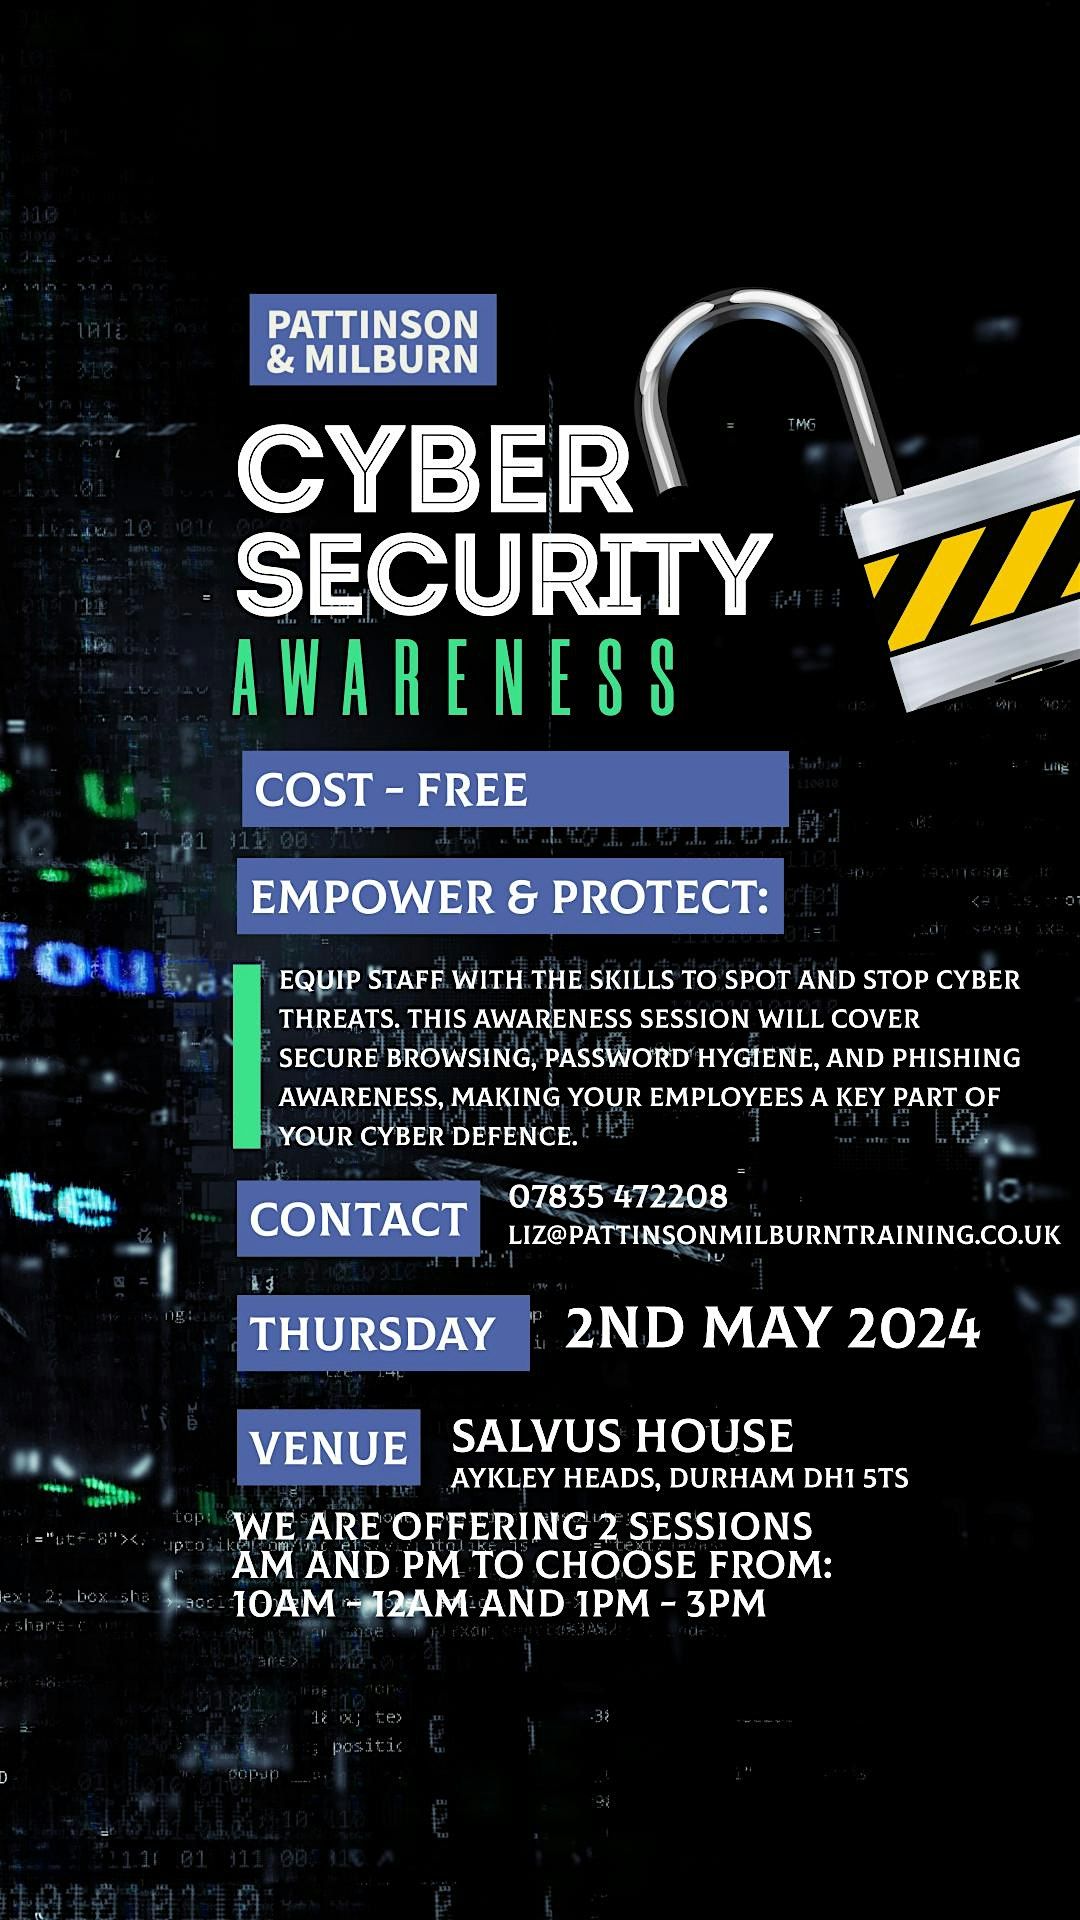 CYBER SECURITY AWARENESS - PROTECTING YOUR BUSINESS